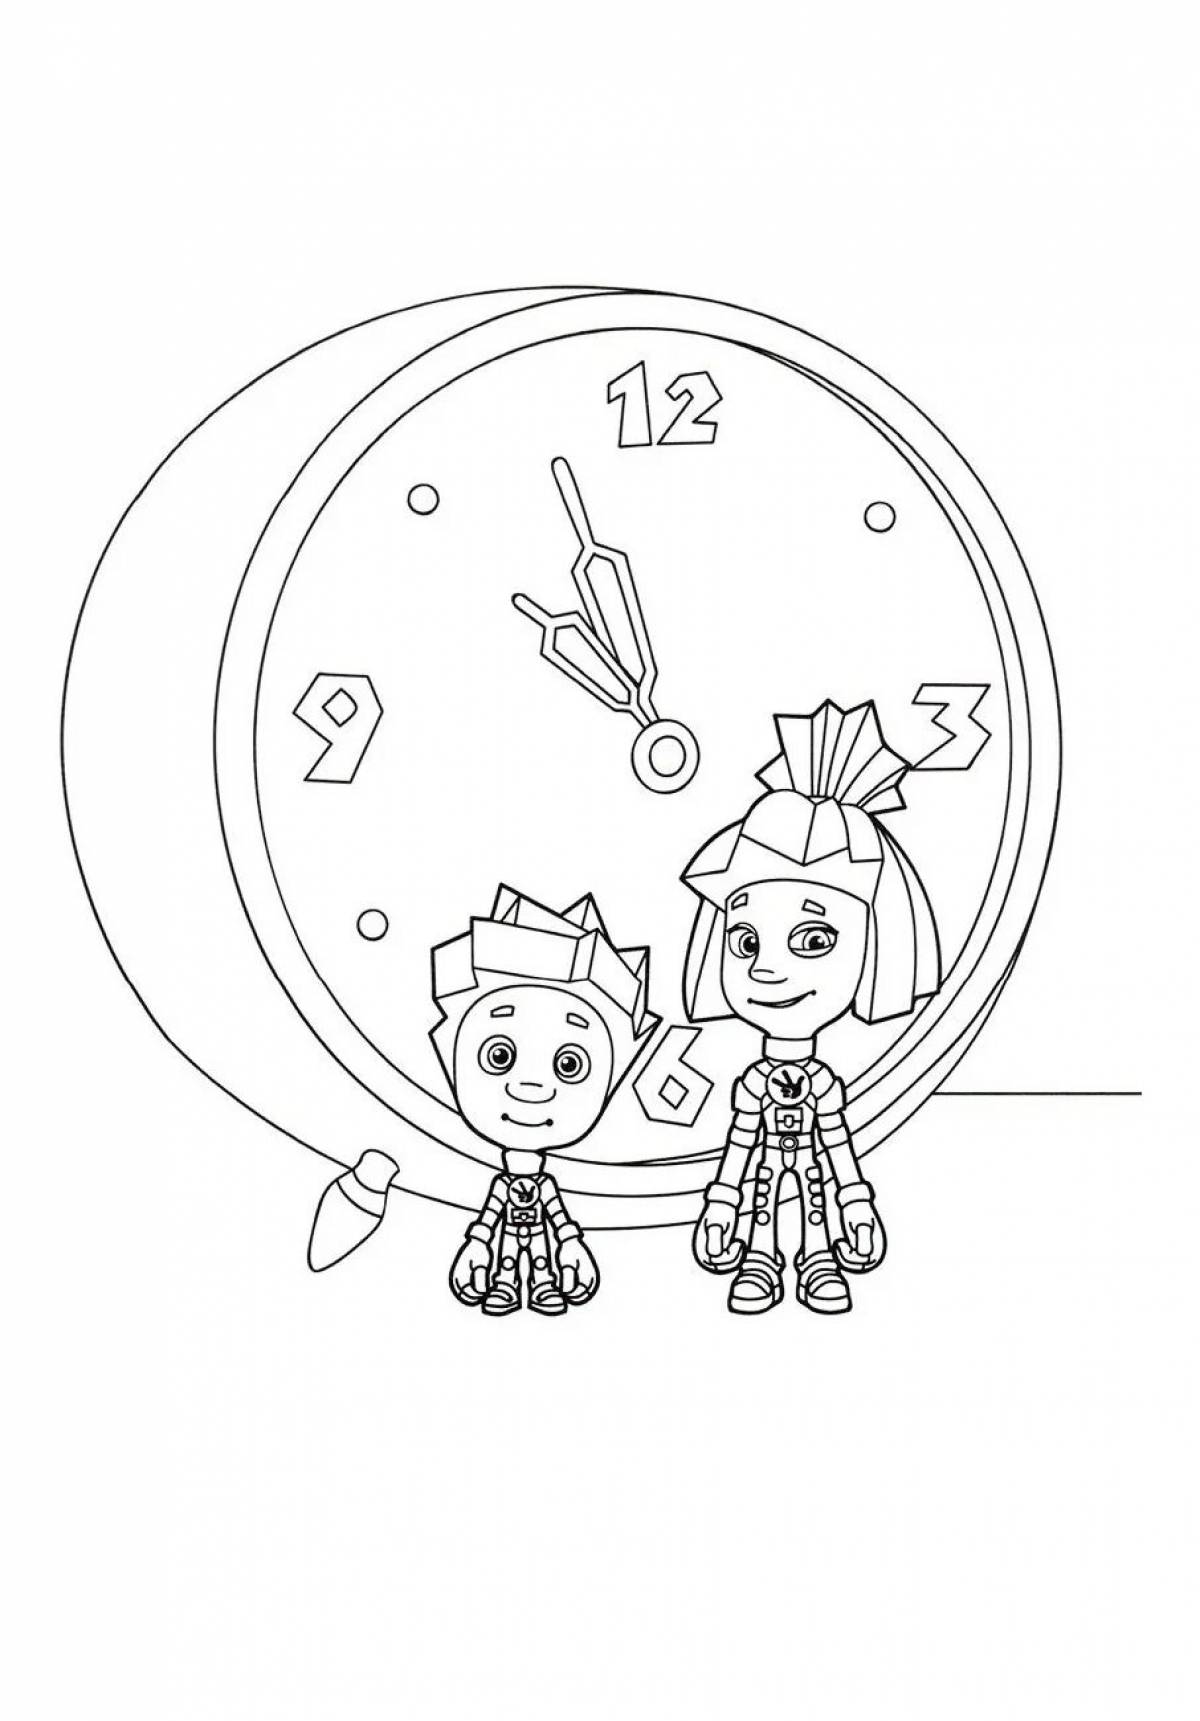 Stimulating coloring page turn it on